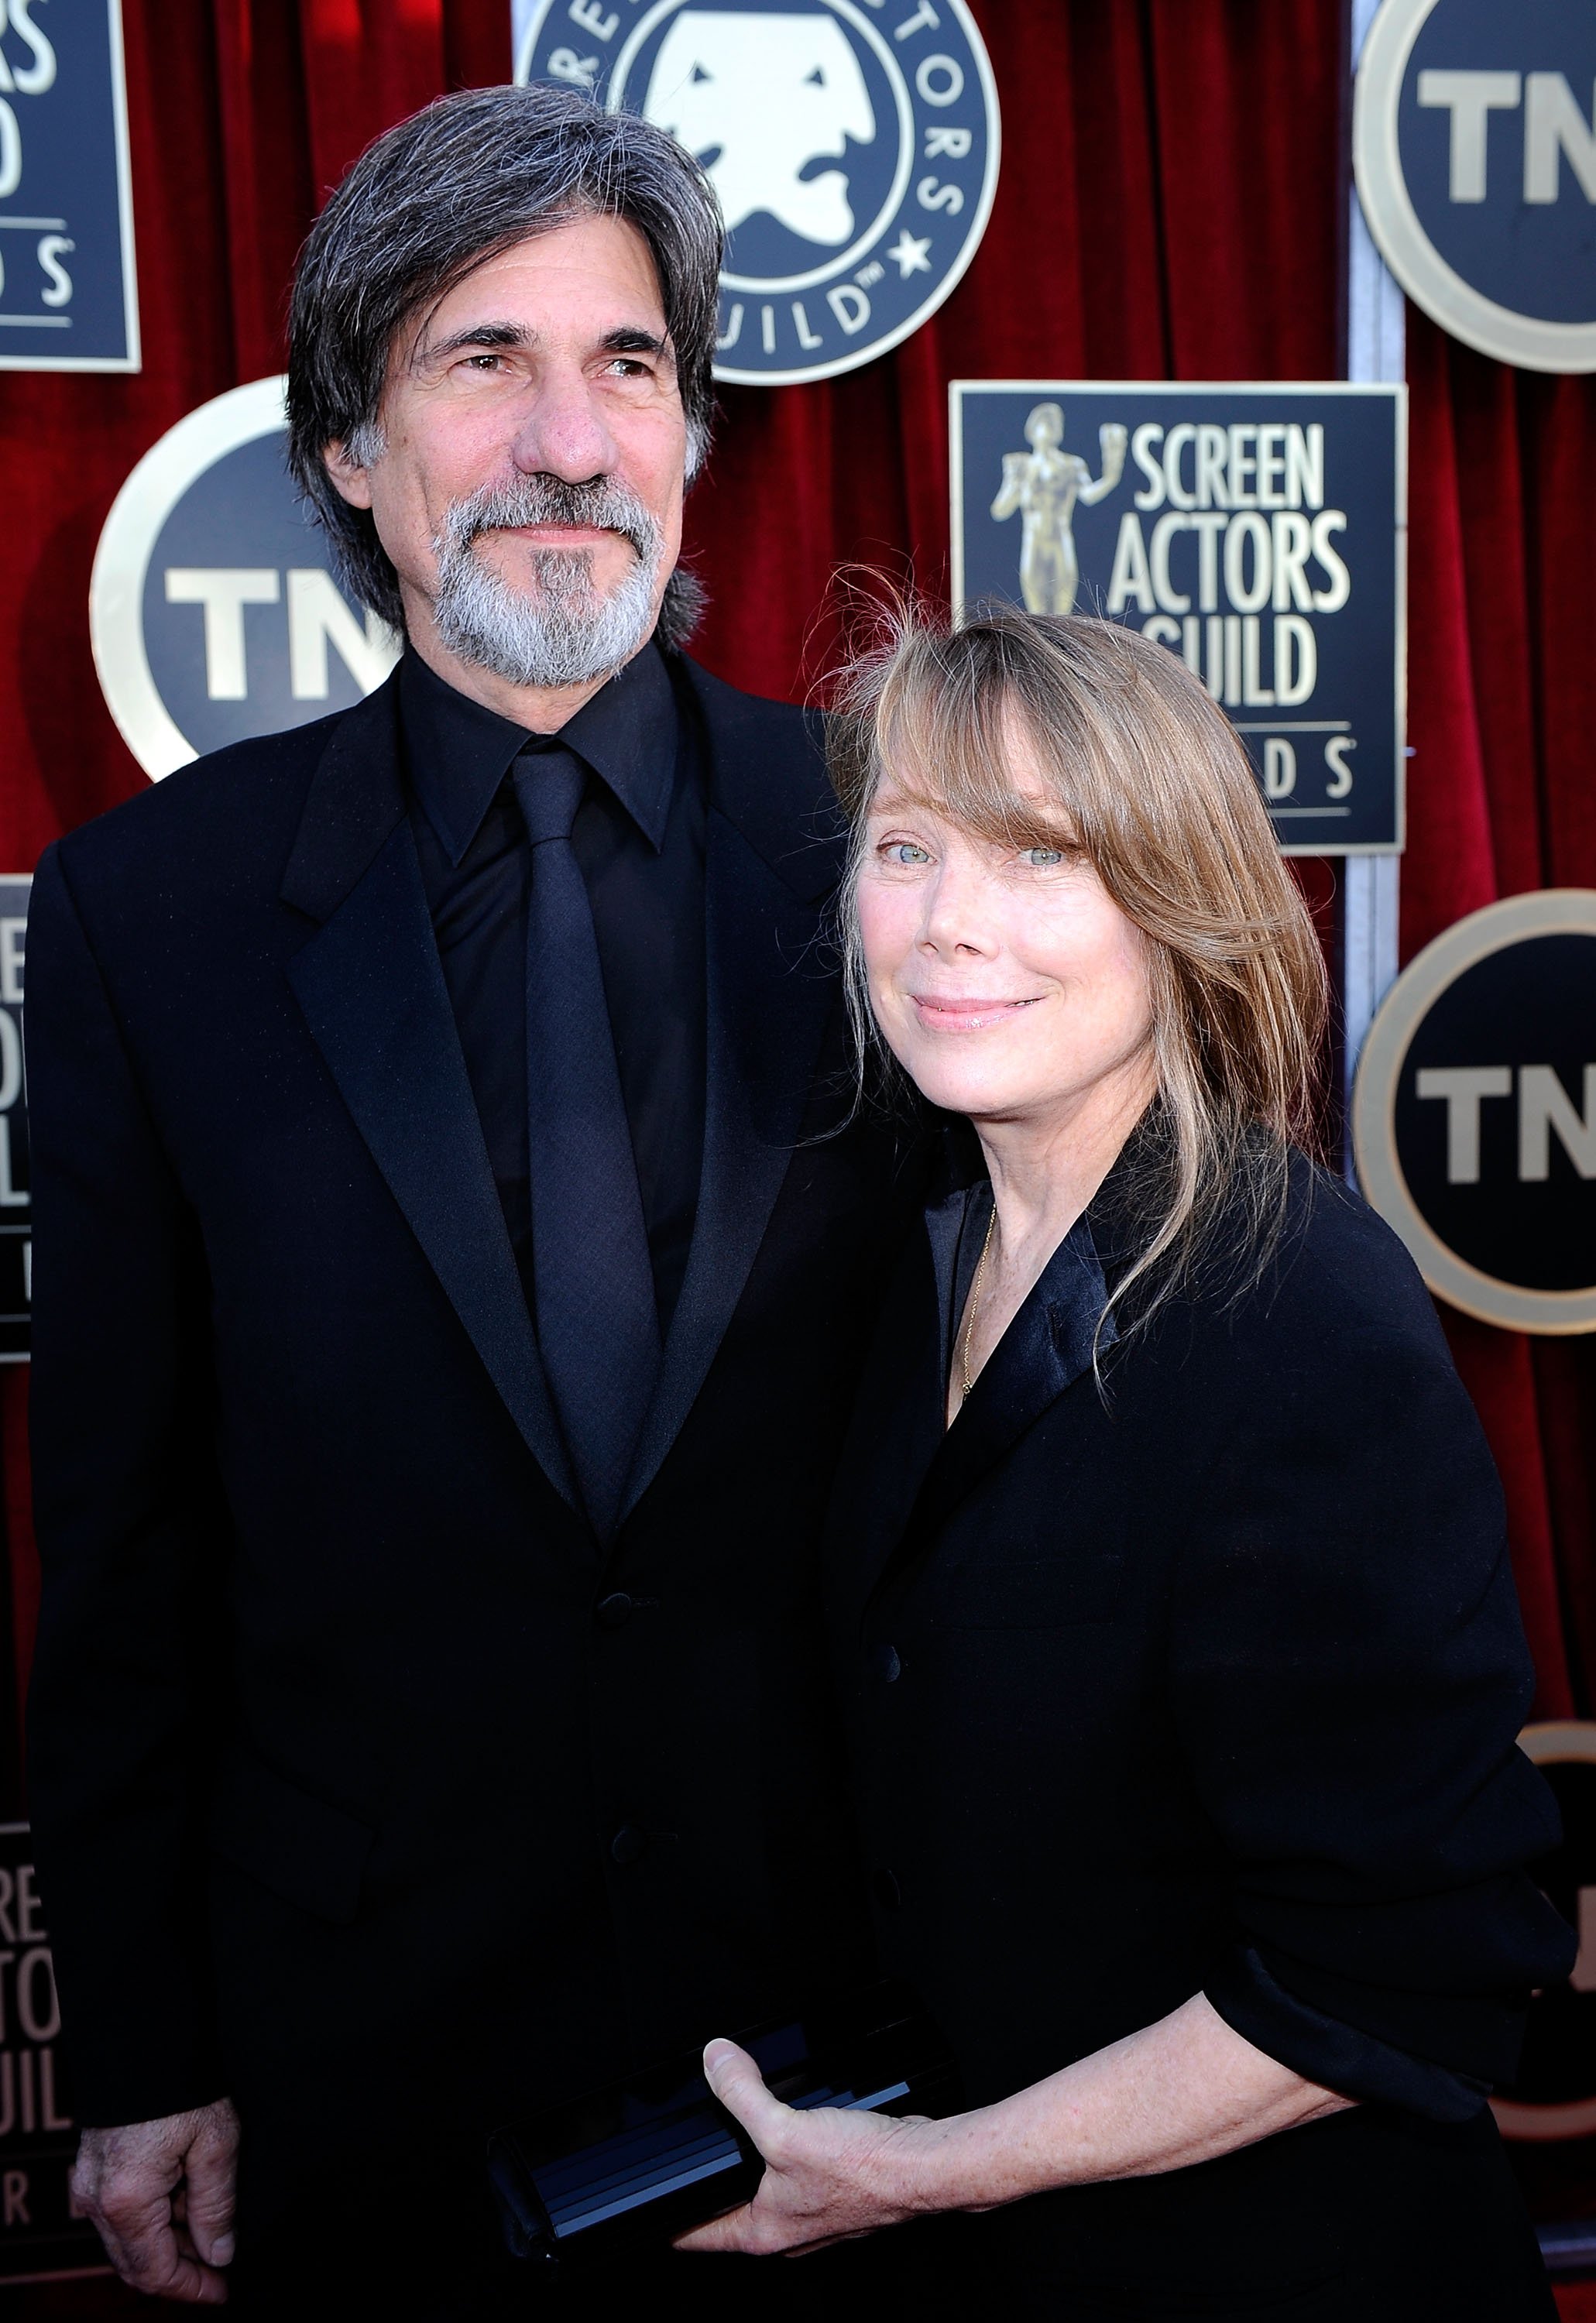 Sissy Spacek and her husband Jack Fisk arrive at the 18th Annual Screen Actors Guild Awards at The Shrine Auditorium on January 29, 2012 in Los Angeles, California | Source: Getty Images